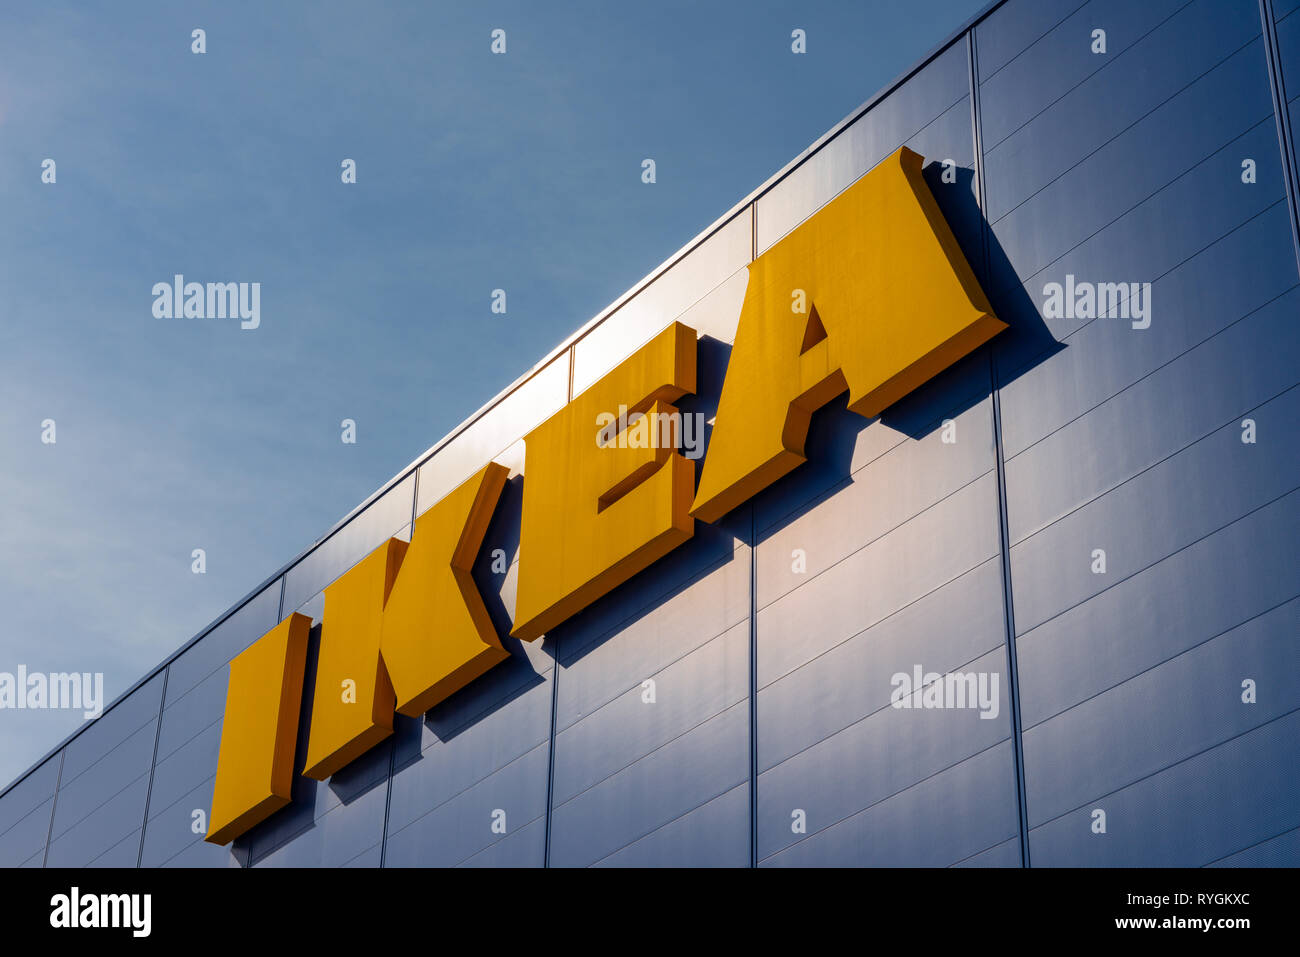 Ikea logo sign against blue sky. Ikea brand yellow and blue colors colours. Yellow logo on blue wall. Opposite colors colours. Stock Photo